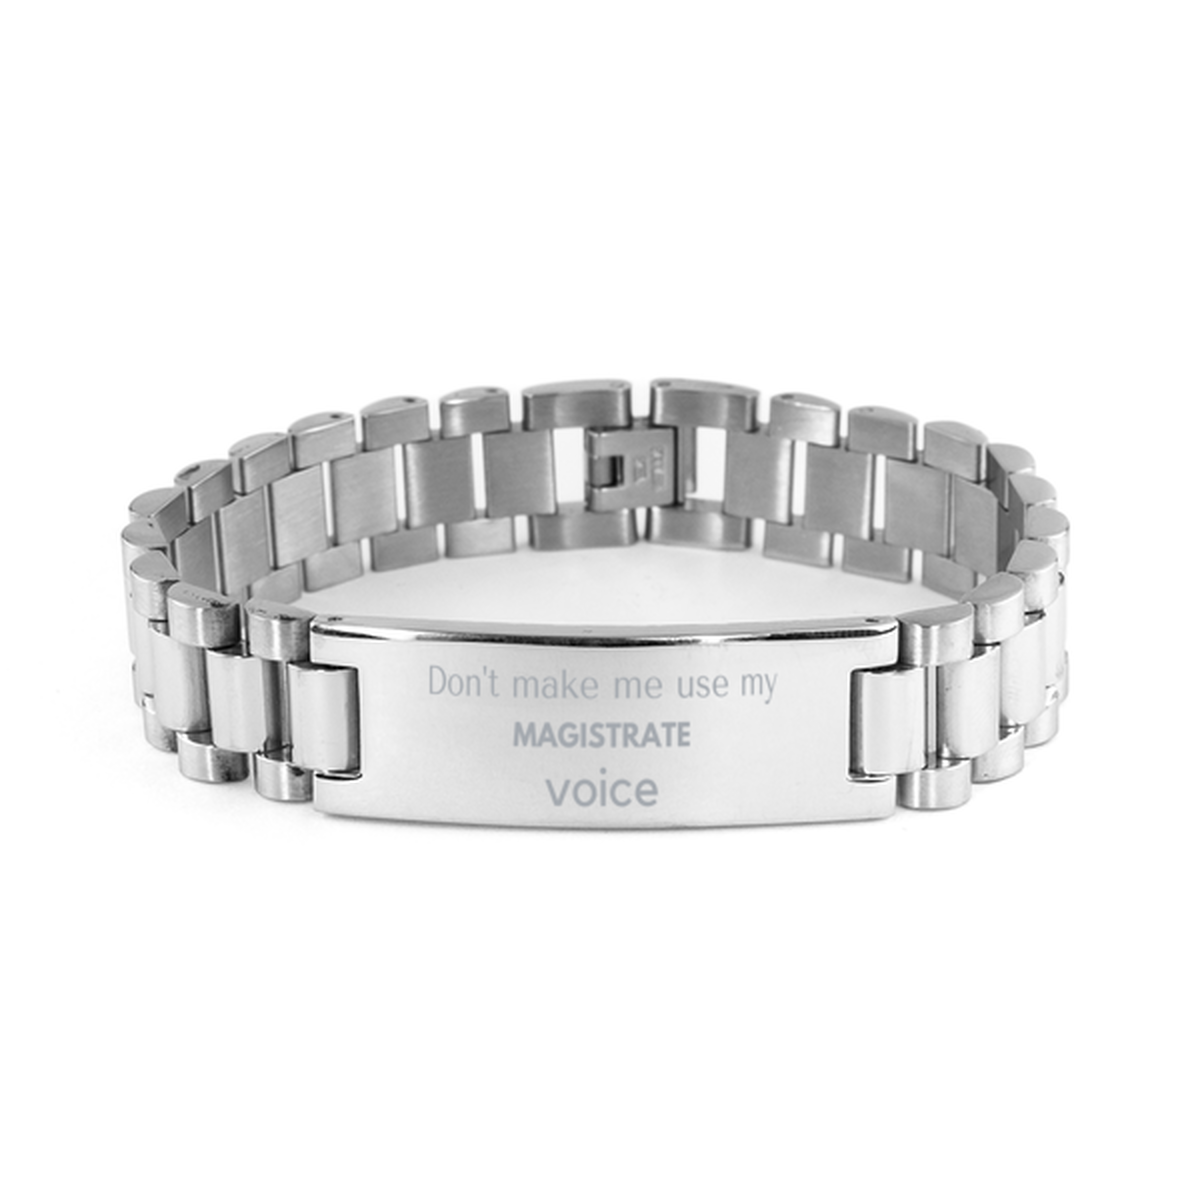 Don't make me use my Magistrate voice, Sarcasm Magistrate Gifts, Christmas Magistrate Ladder Stainless Steel Bracelet Birthday Unique Gifts For Magistrate Coworkers, Men, Women, Colleague, Friends